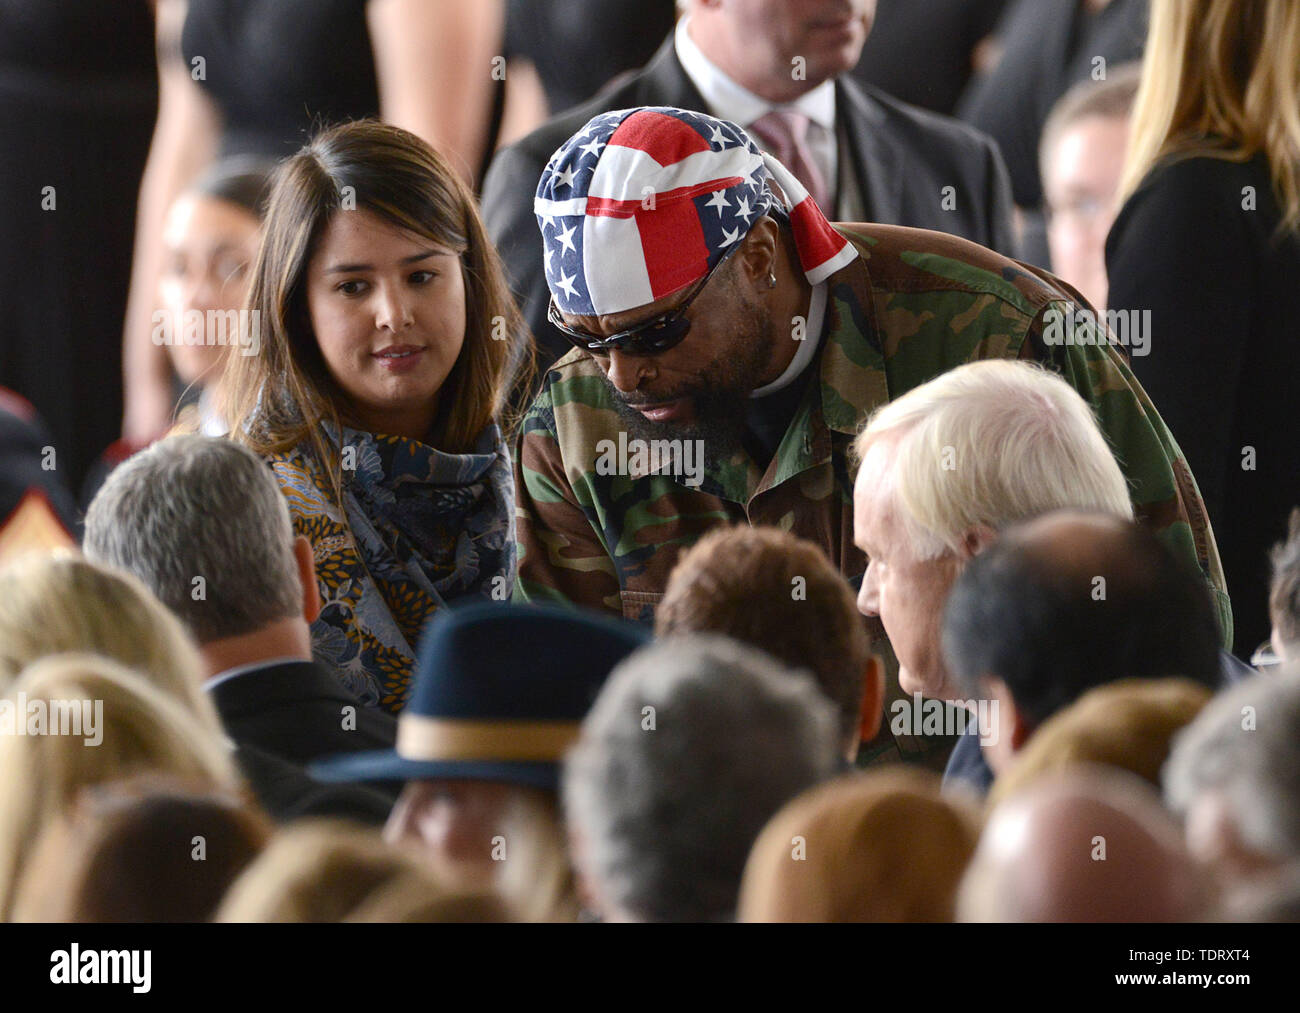 March 11, 2016 - Simi Valley, California - Mister T @ the Nancy Reagan funeral held @ the Ronald Reagan Presidential library...March 11, 2016 (Credit Image: Â© Chris Delmas/ZUMA Wire) Stock Photo